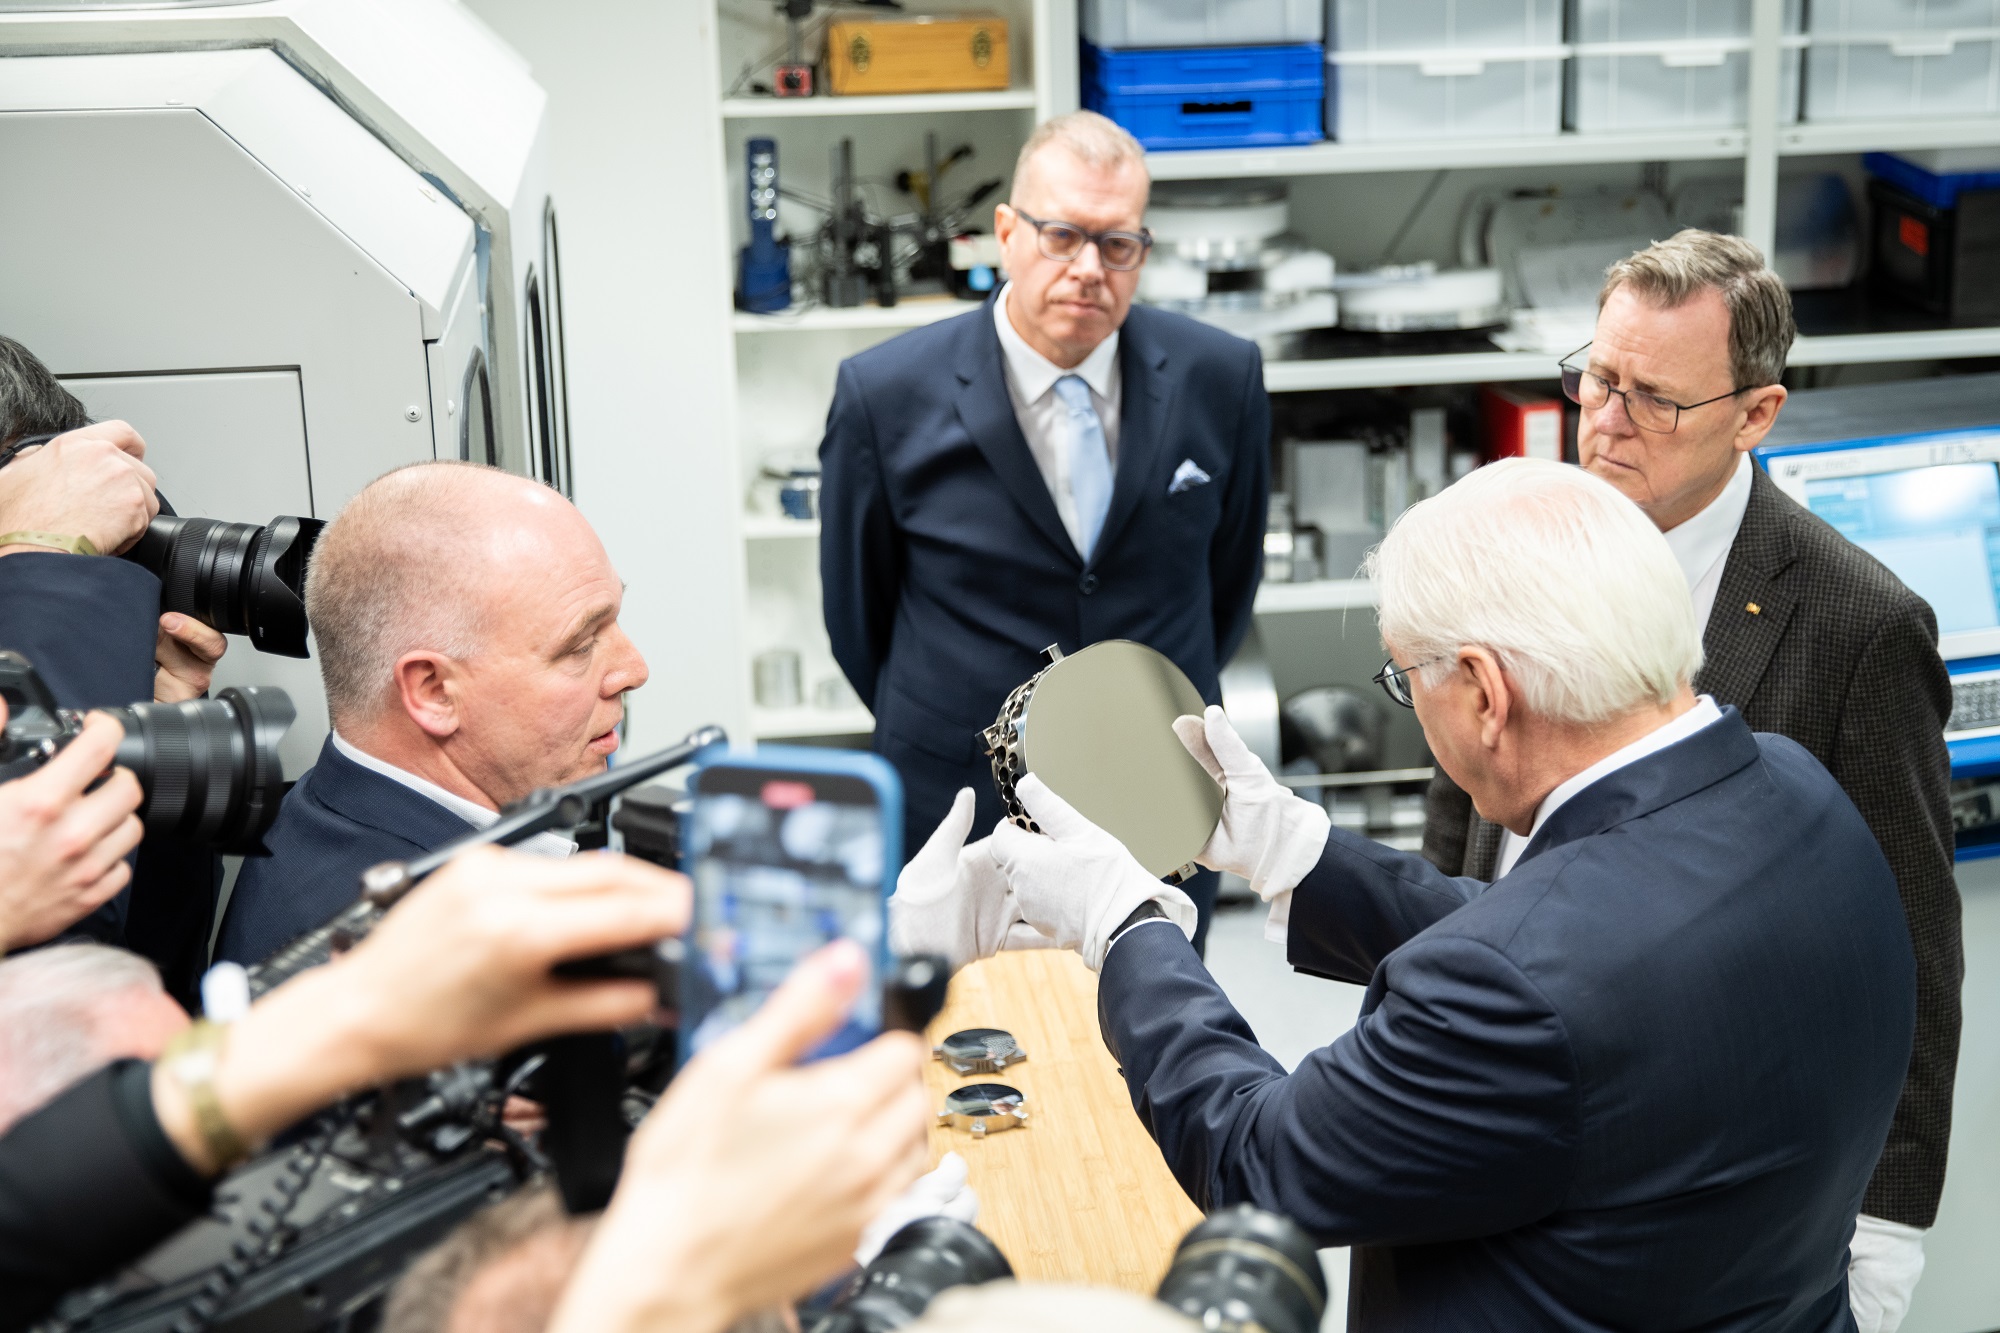 The Federal President visits a laboratory for ultra-precision manufacturing and inspects a metal optic.